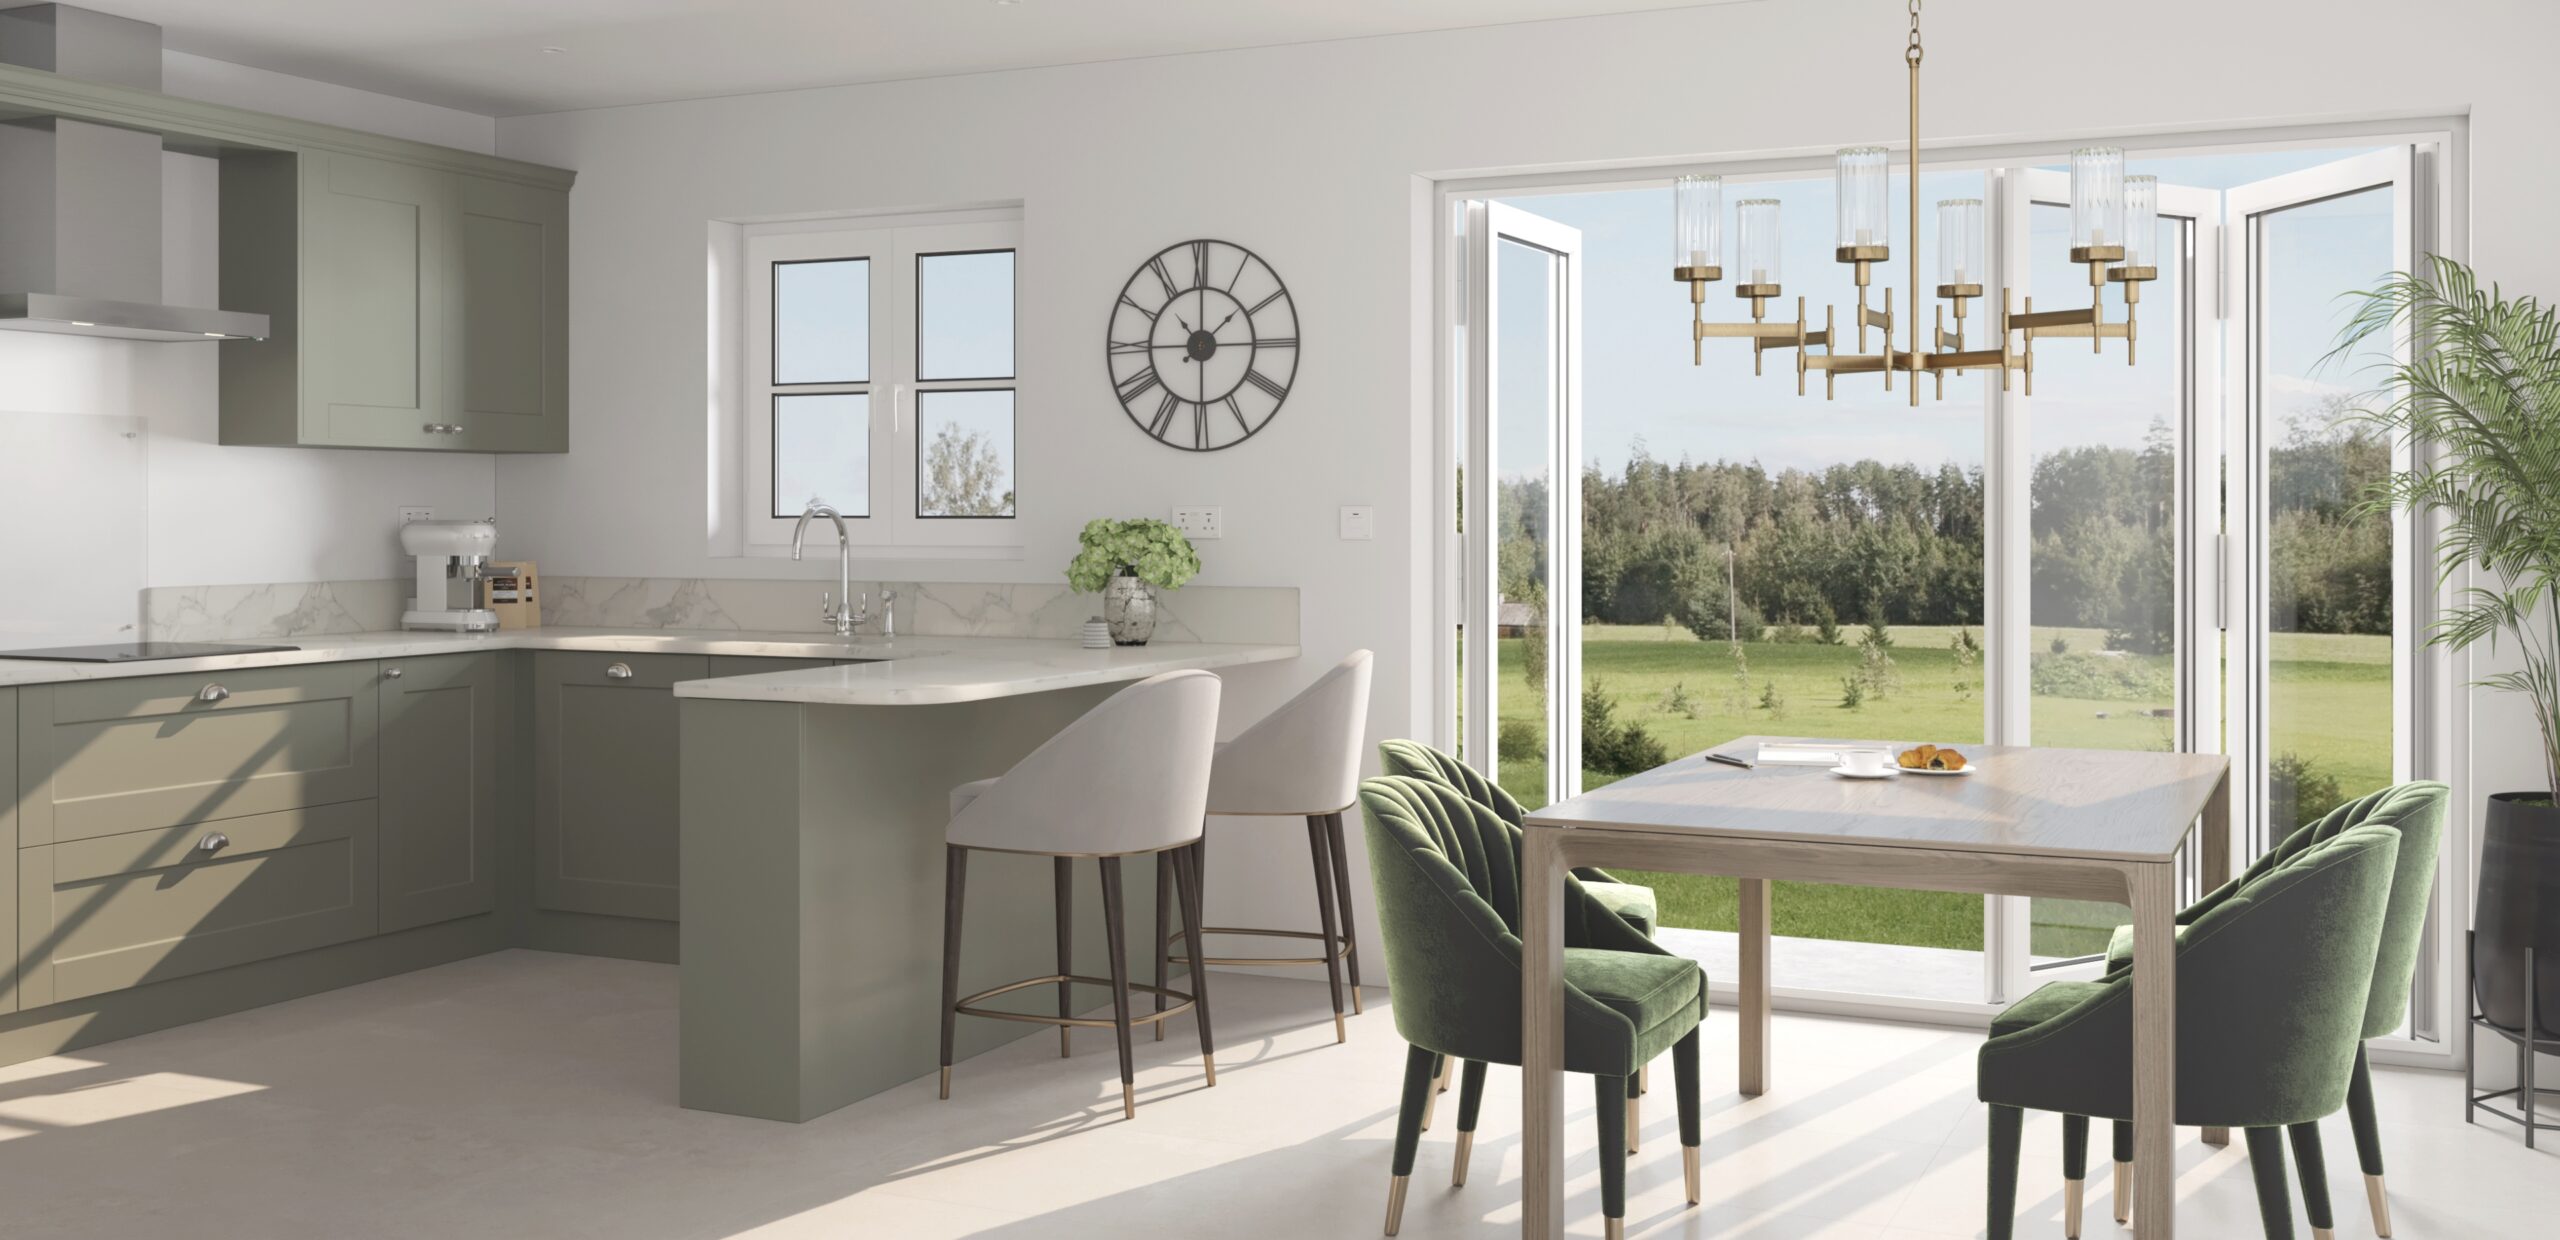 CGI of Great Maplestead's kitchen breakfast area with bi-folding doors offering a view of the countryside.